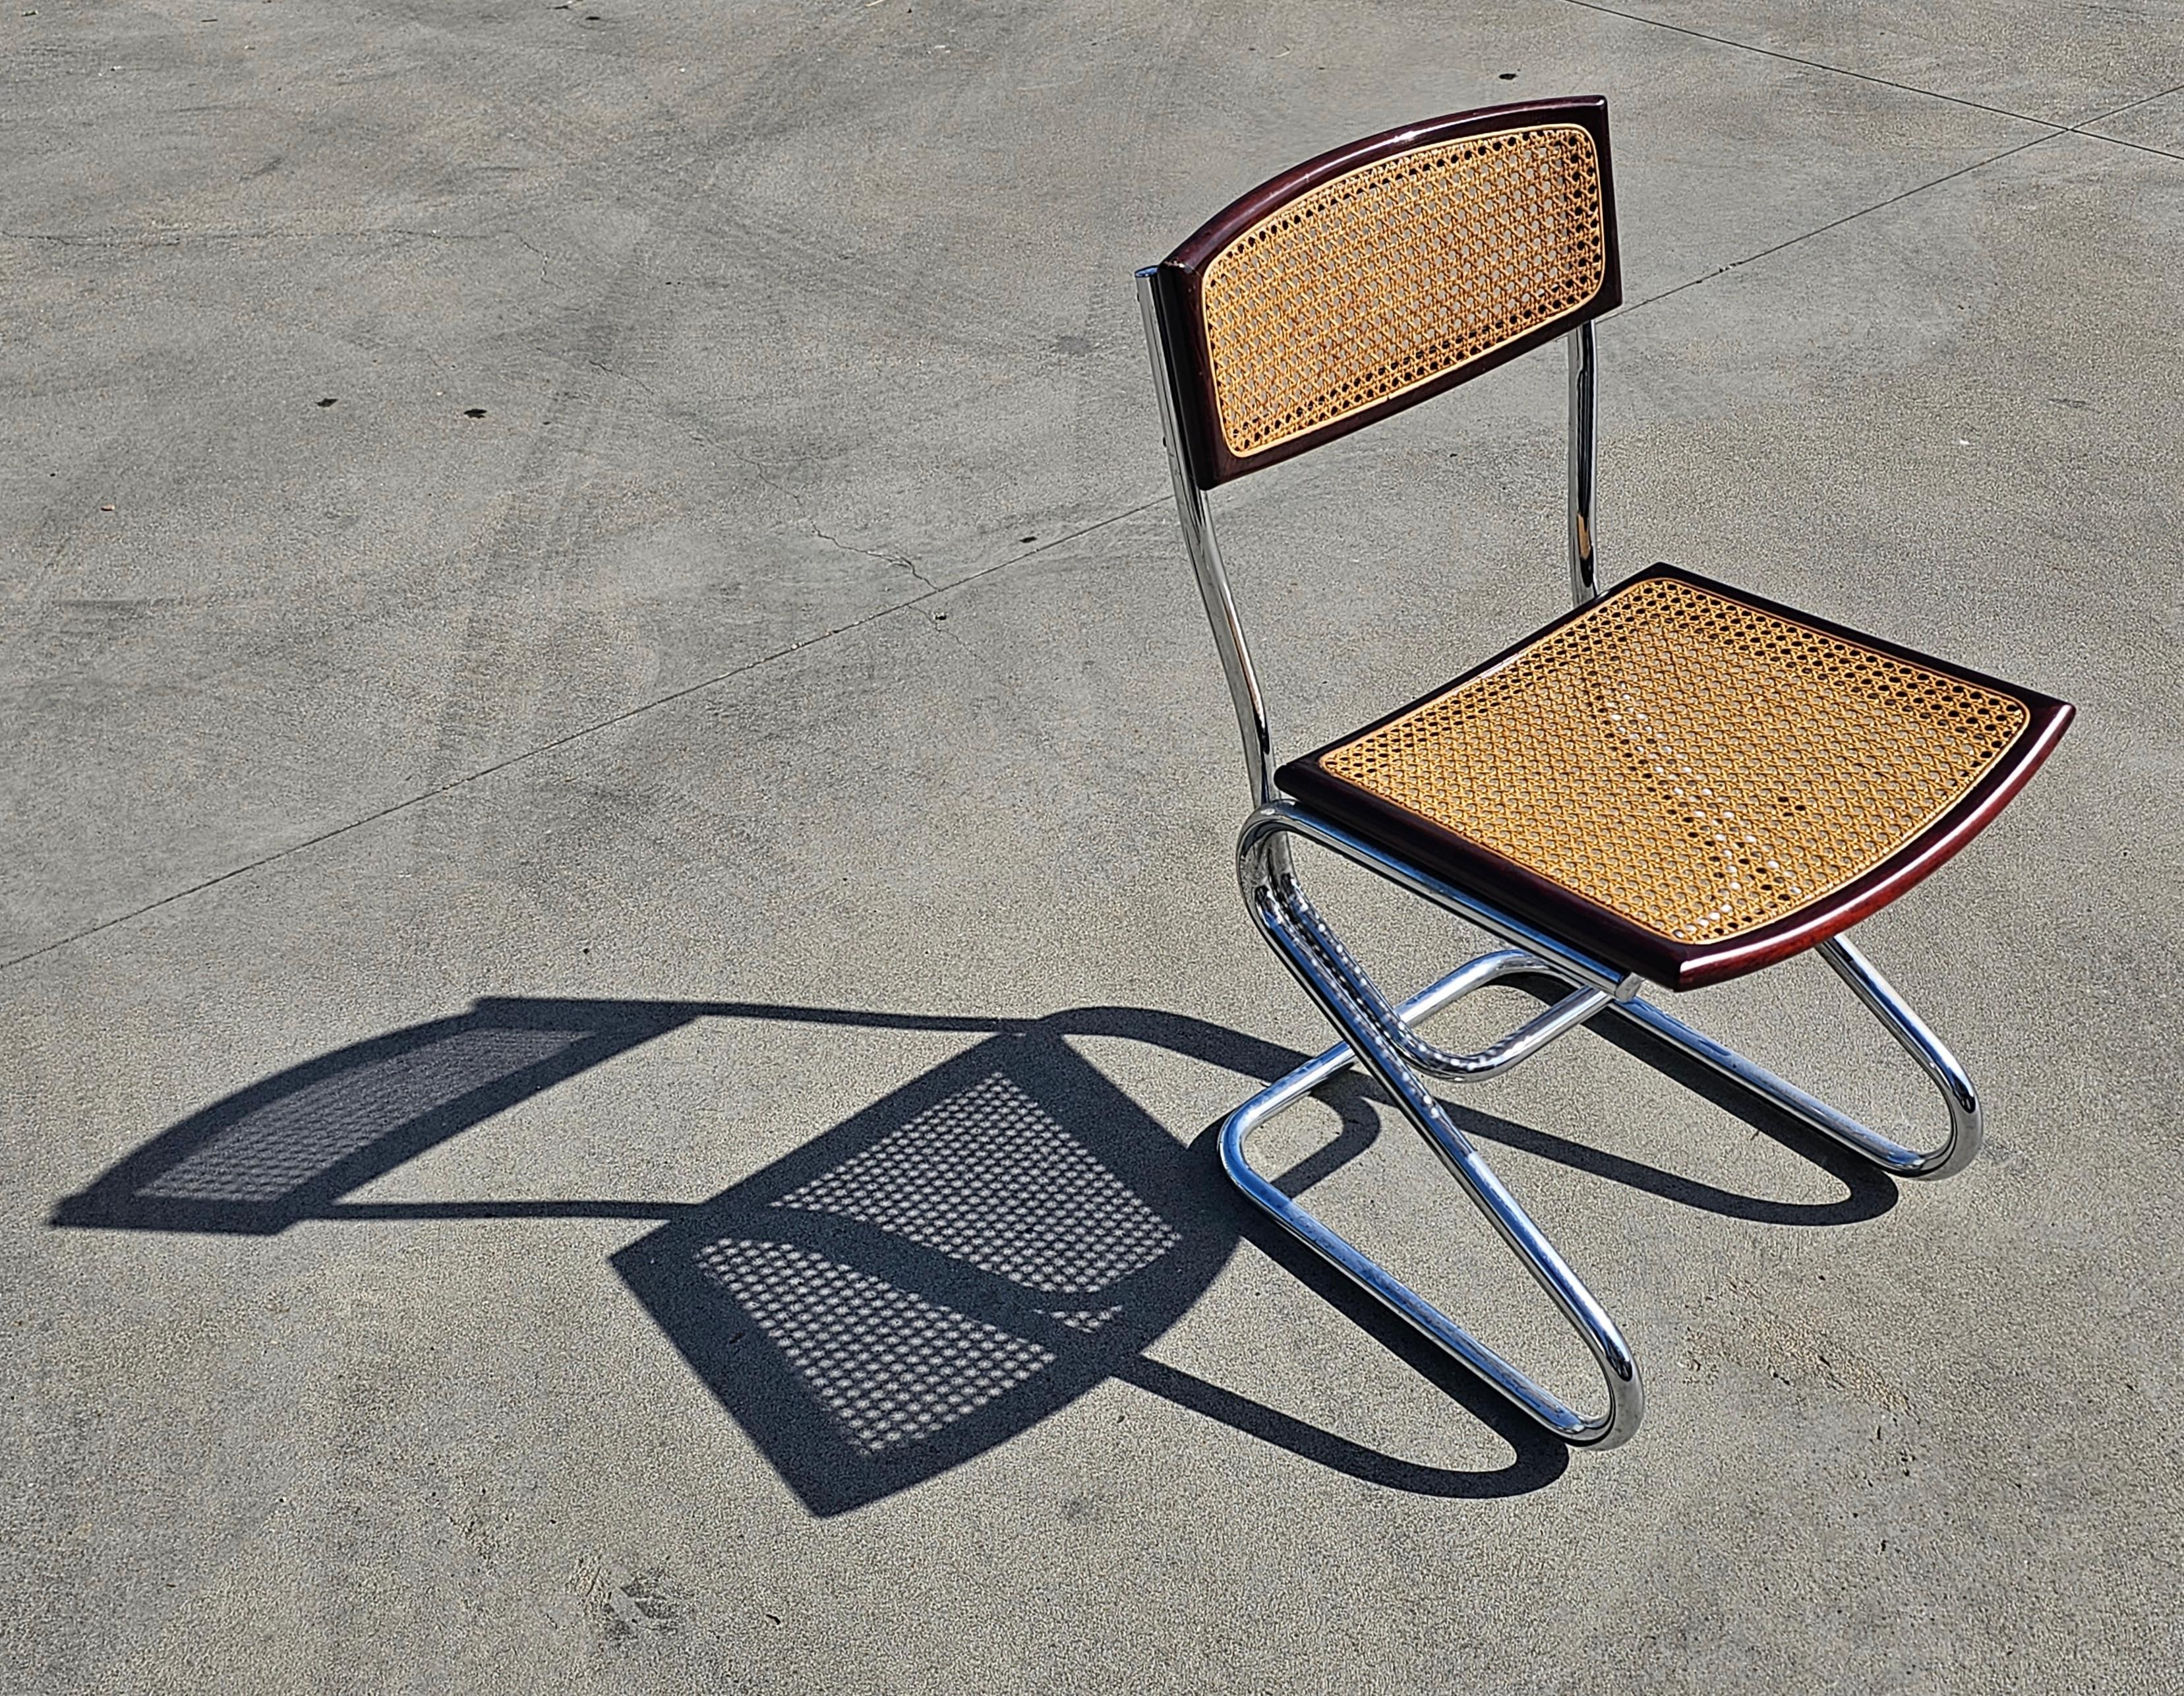 In this listing you will find a set of 6 Bauhaus style dining chairs done in style of Cesca chairs designed by Marcel Breuer. They feature tubular frames with seats and backrests done in beech wood and cane. The cane on the seats was recently